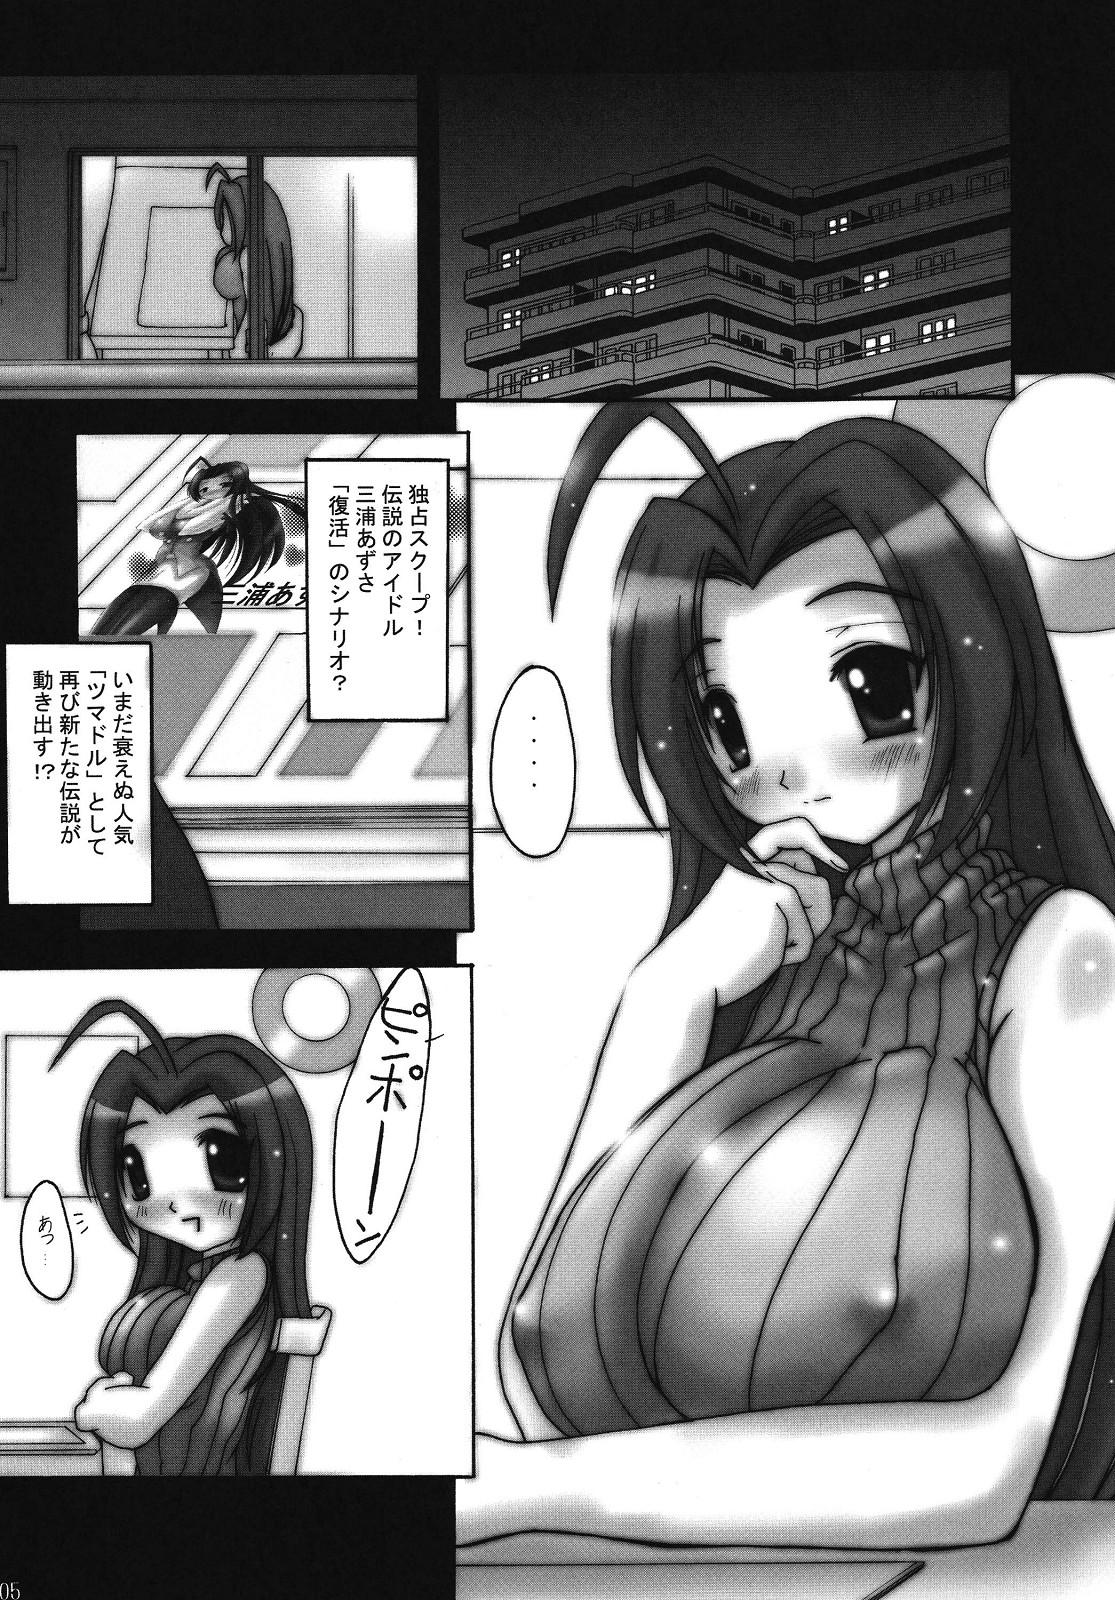 Fit hiddentr@ck.04 - The idolmaster Pmv - Page 4